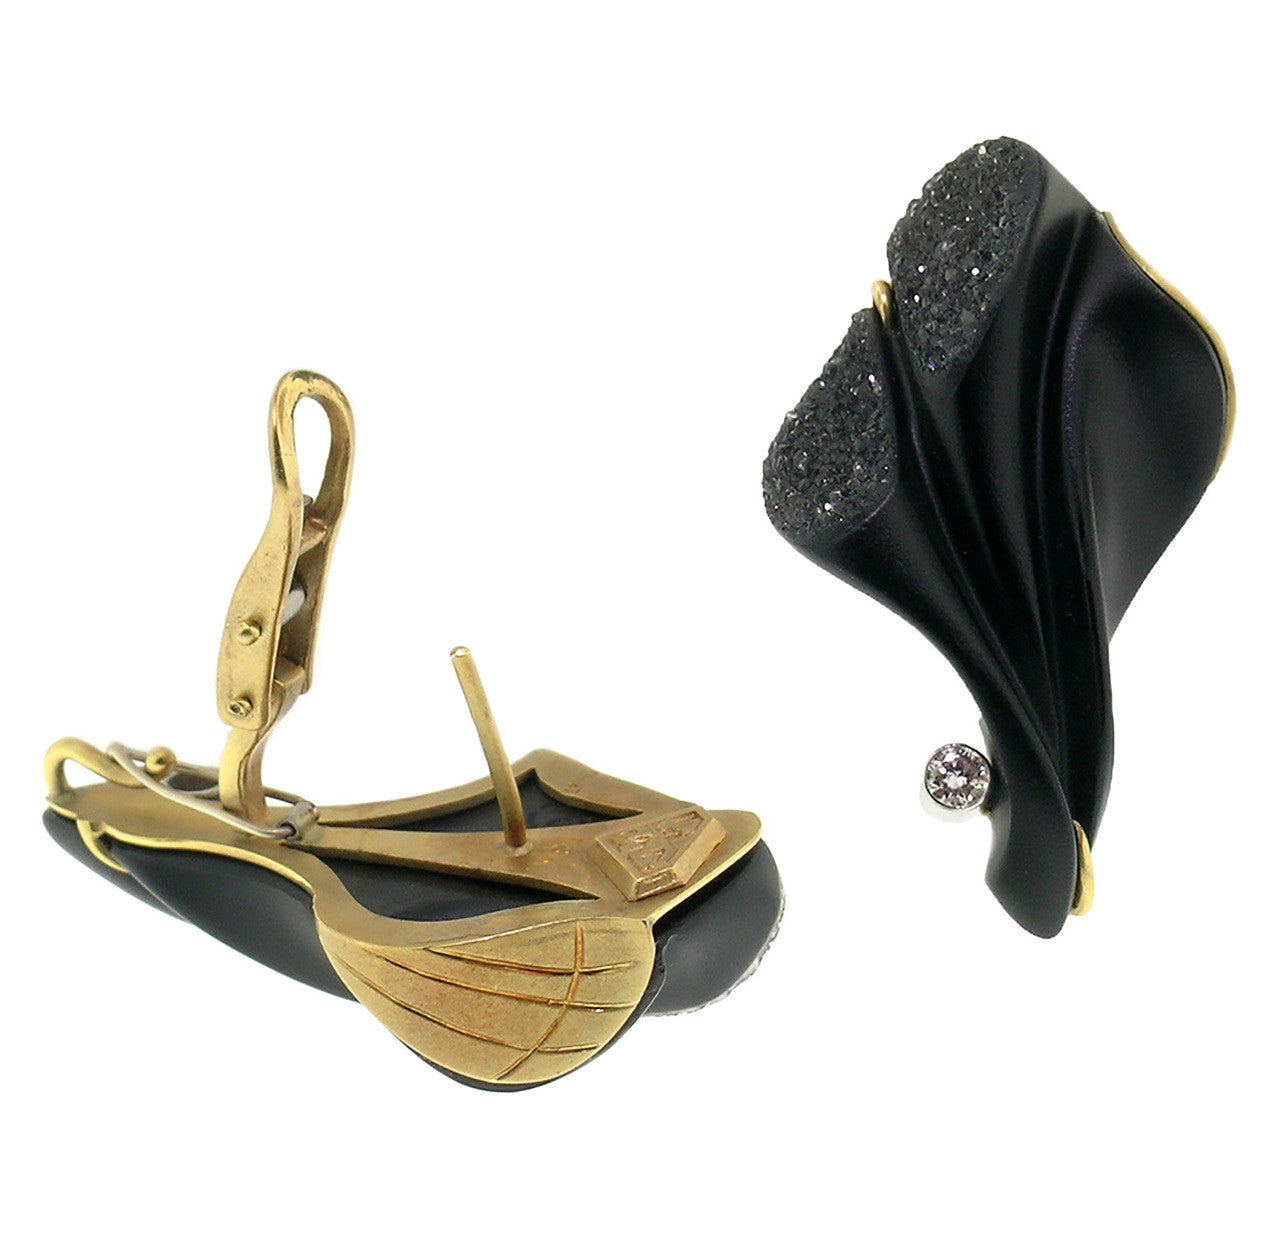 Steve Walters Carved Black Chalcedony Diamond 18kt Earrings made in USA for Cynthia Scott Jewelry